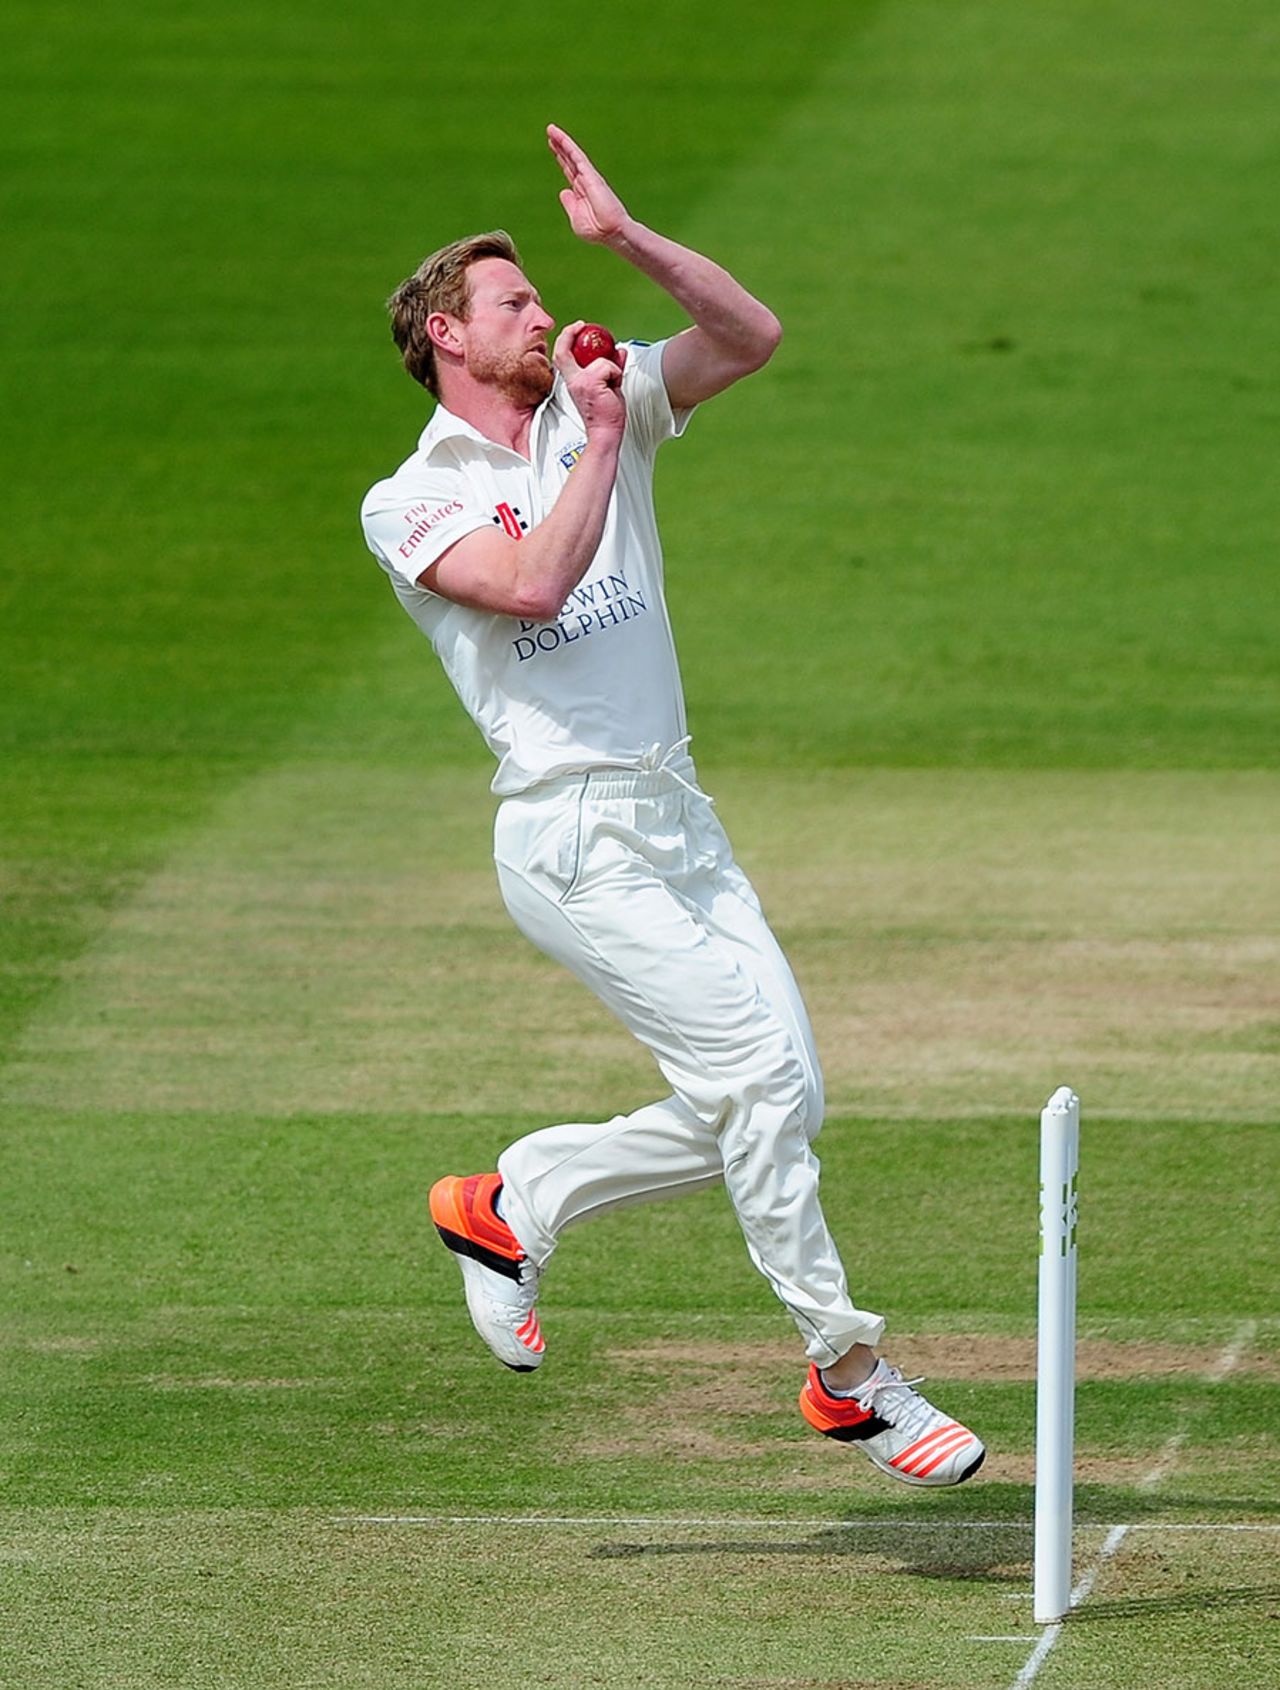 Paul Collingwood bowled seven overs for just one run, Middlesex v Durham, County Championship Division One, Lord's, 1st day, May 2, 2015